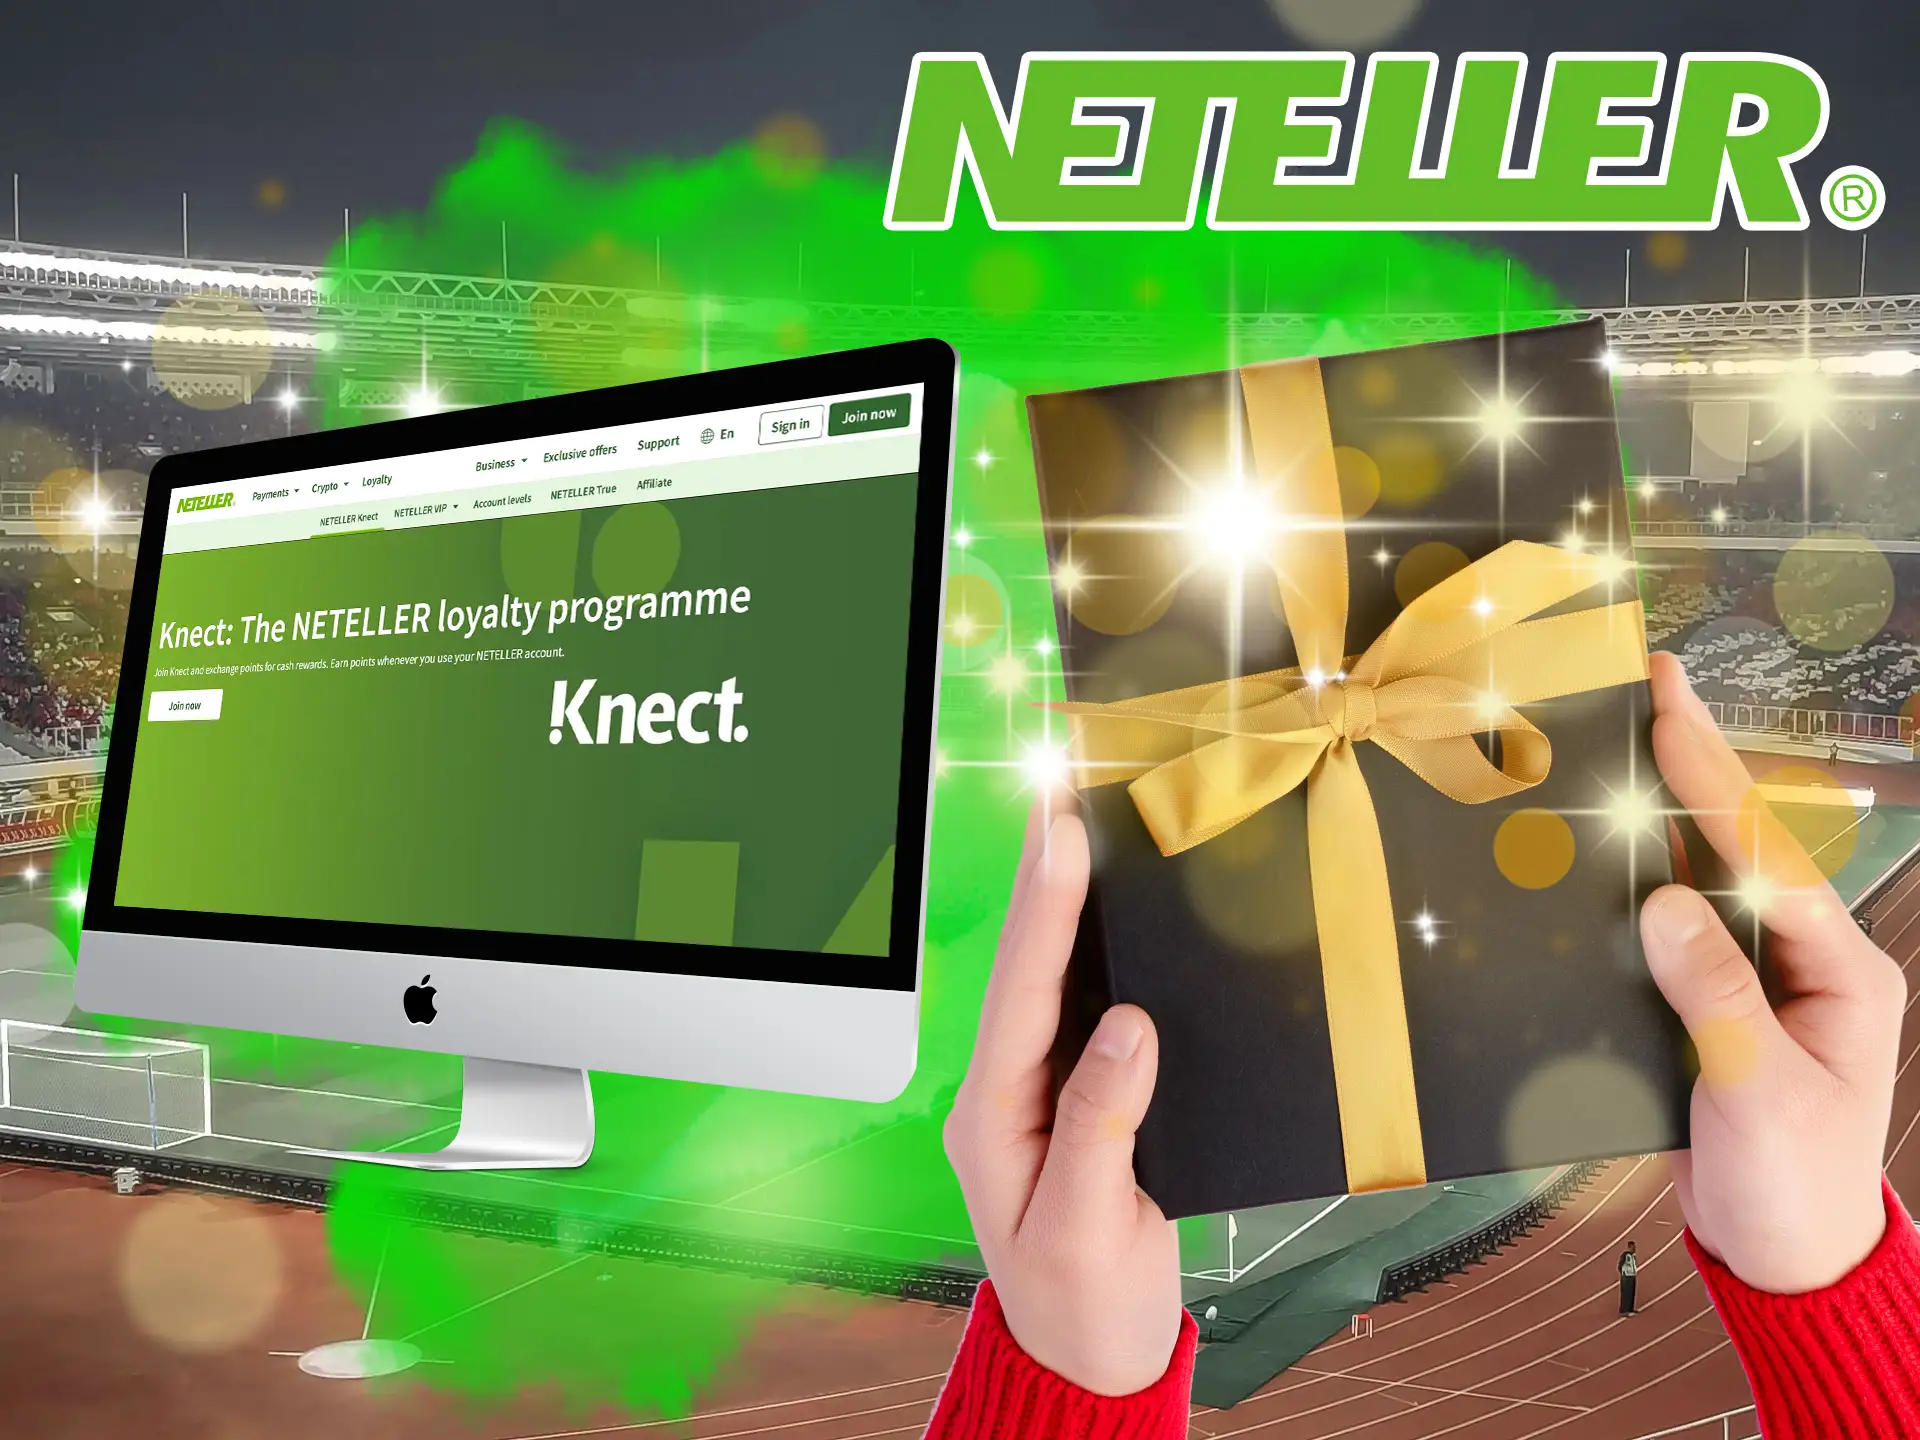 Receive special offers from Neteller, which will give you a new and pleasant interaction experience.